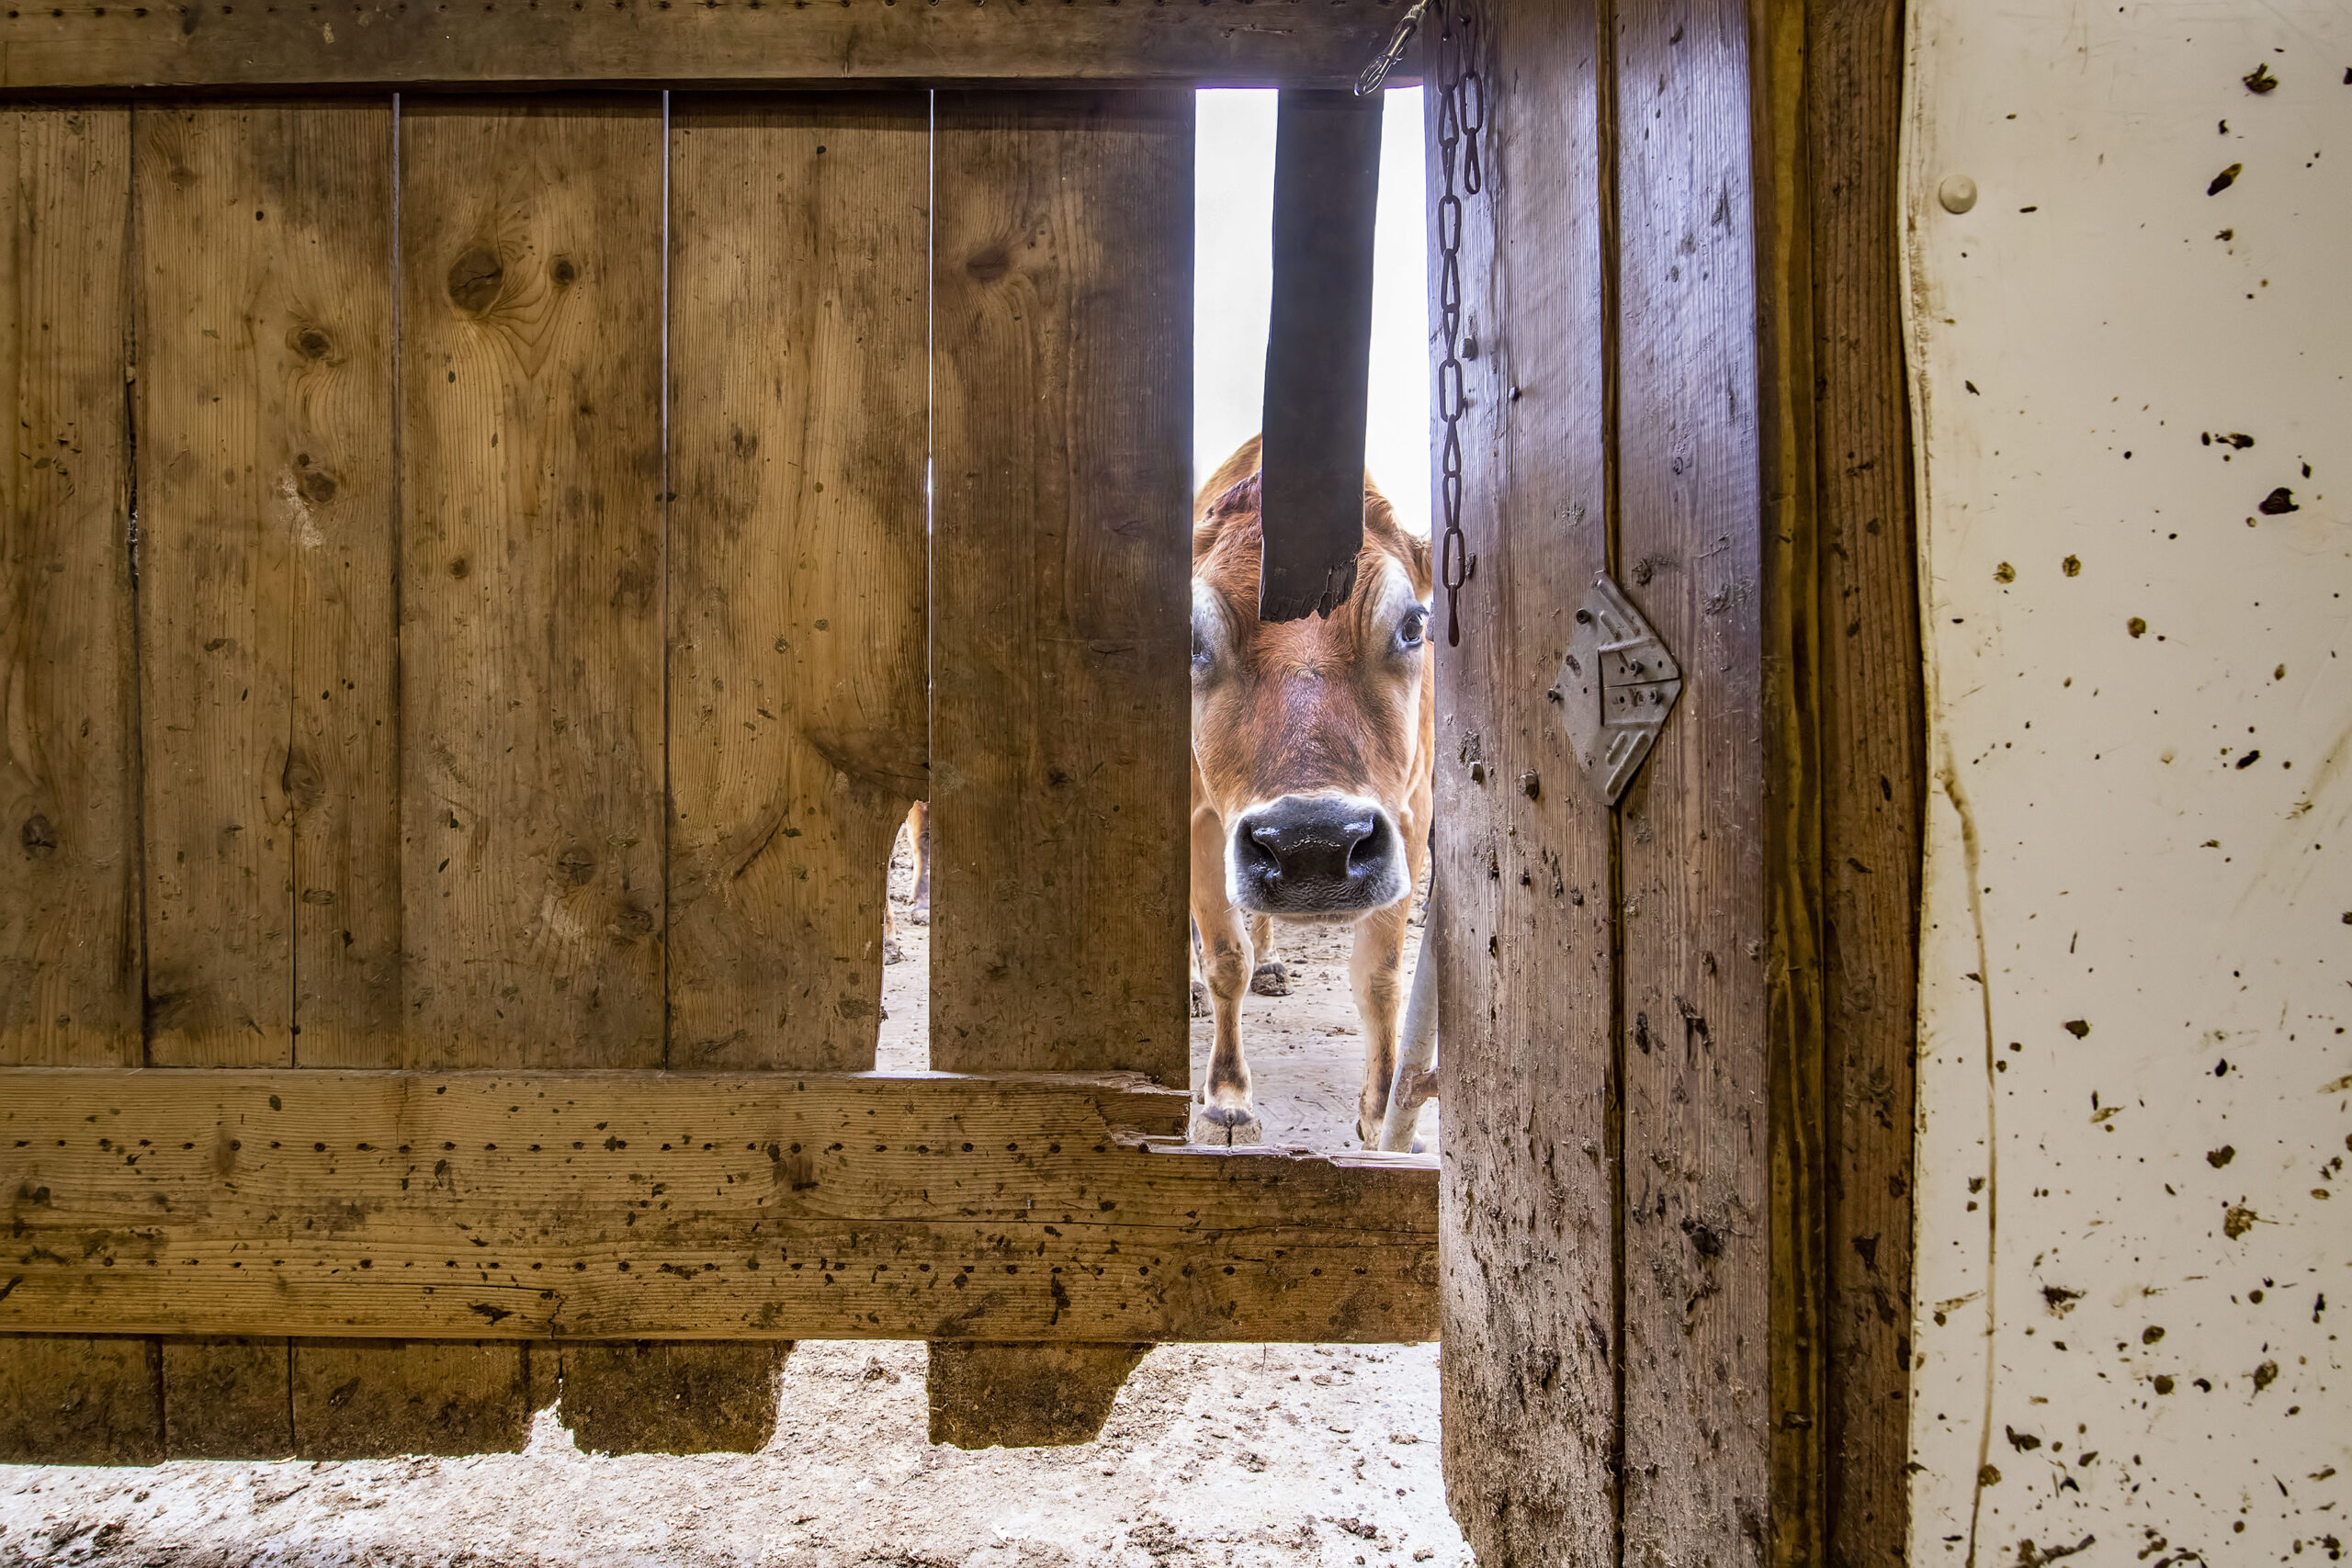 A cow peeks inside the milking pen as she eagerly awaits her turn during the afternoon milking of the cows at the Mecox Bay Dairy on March 1st, 2022